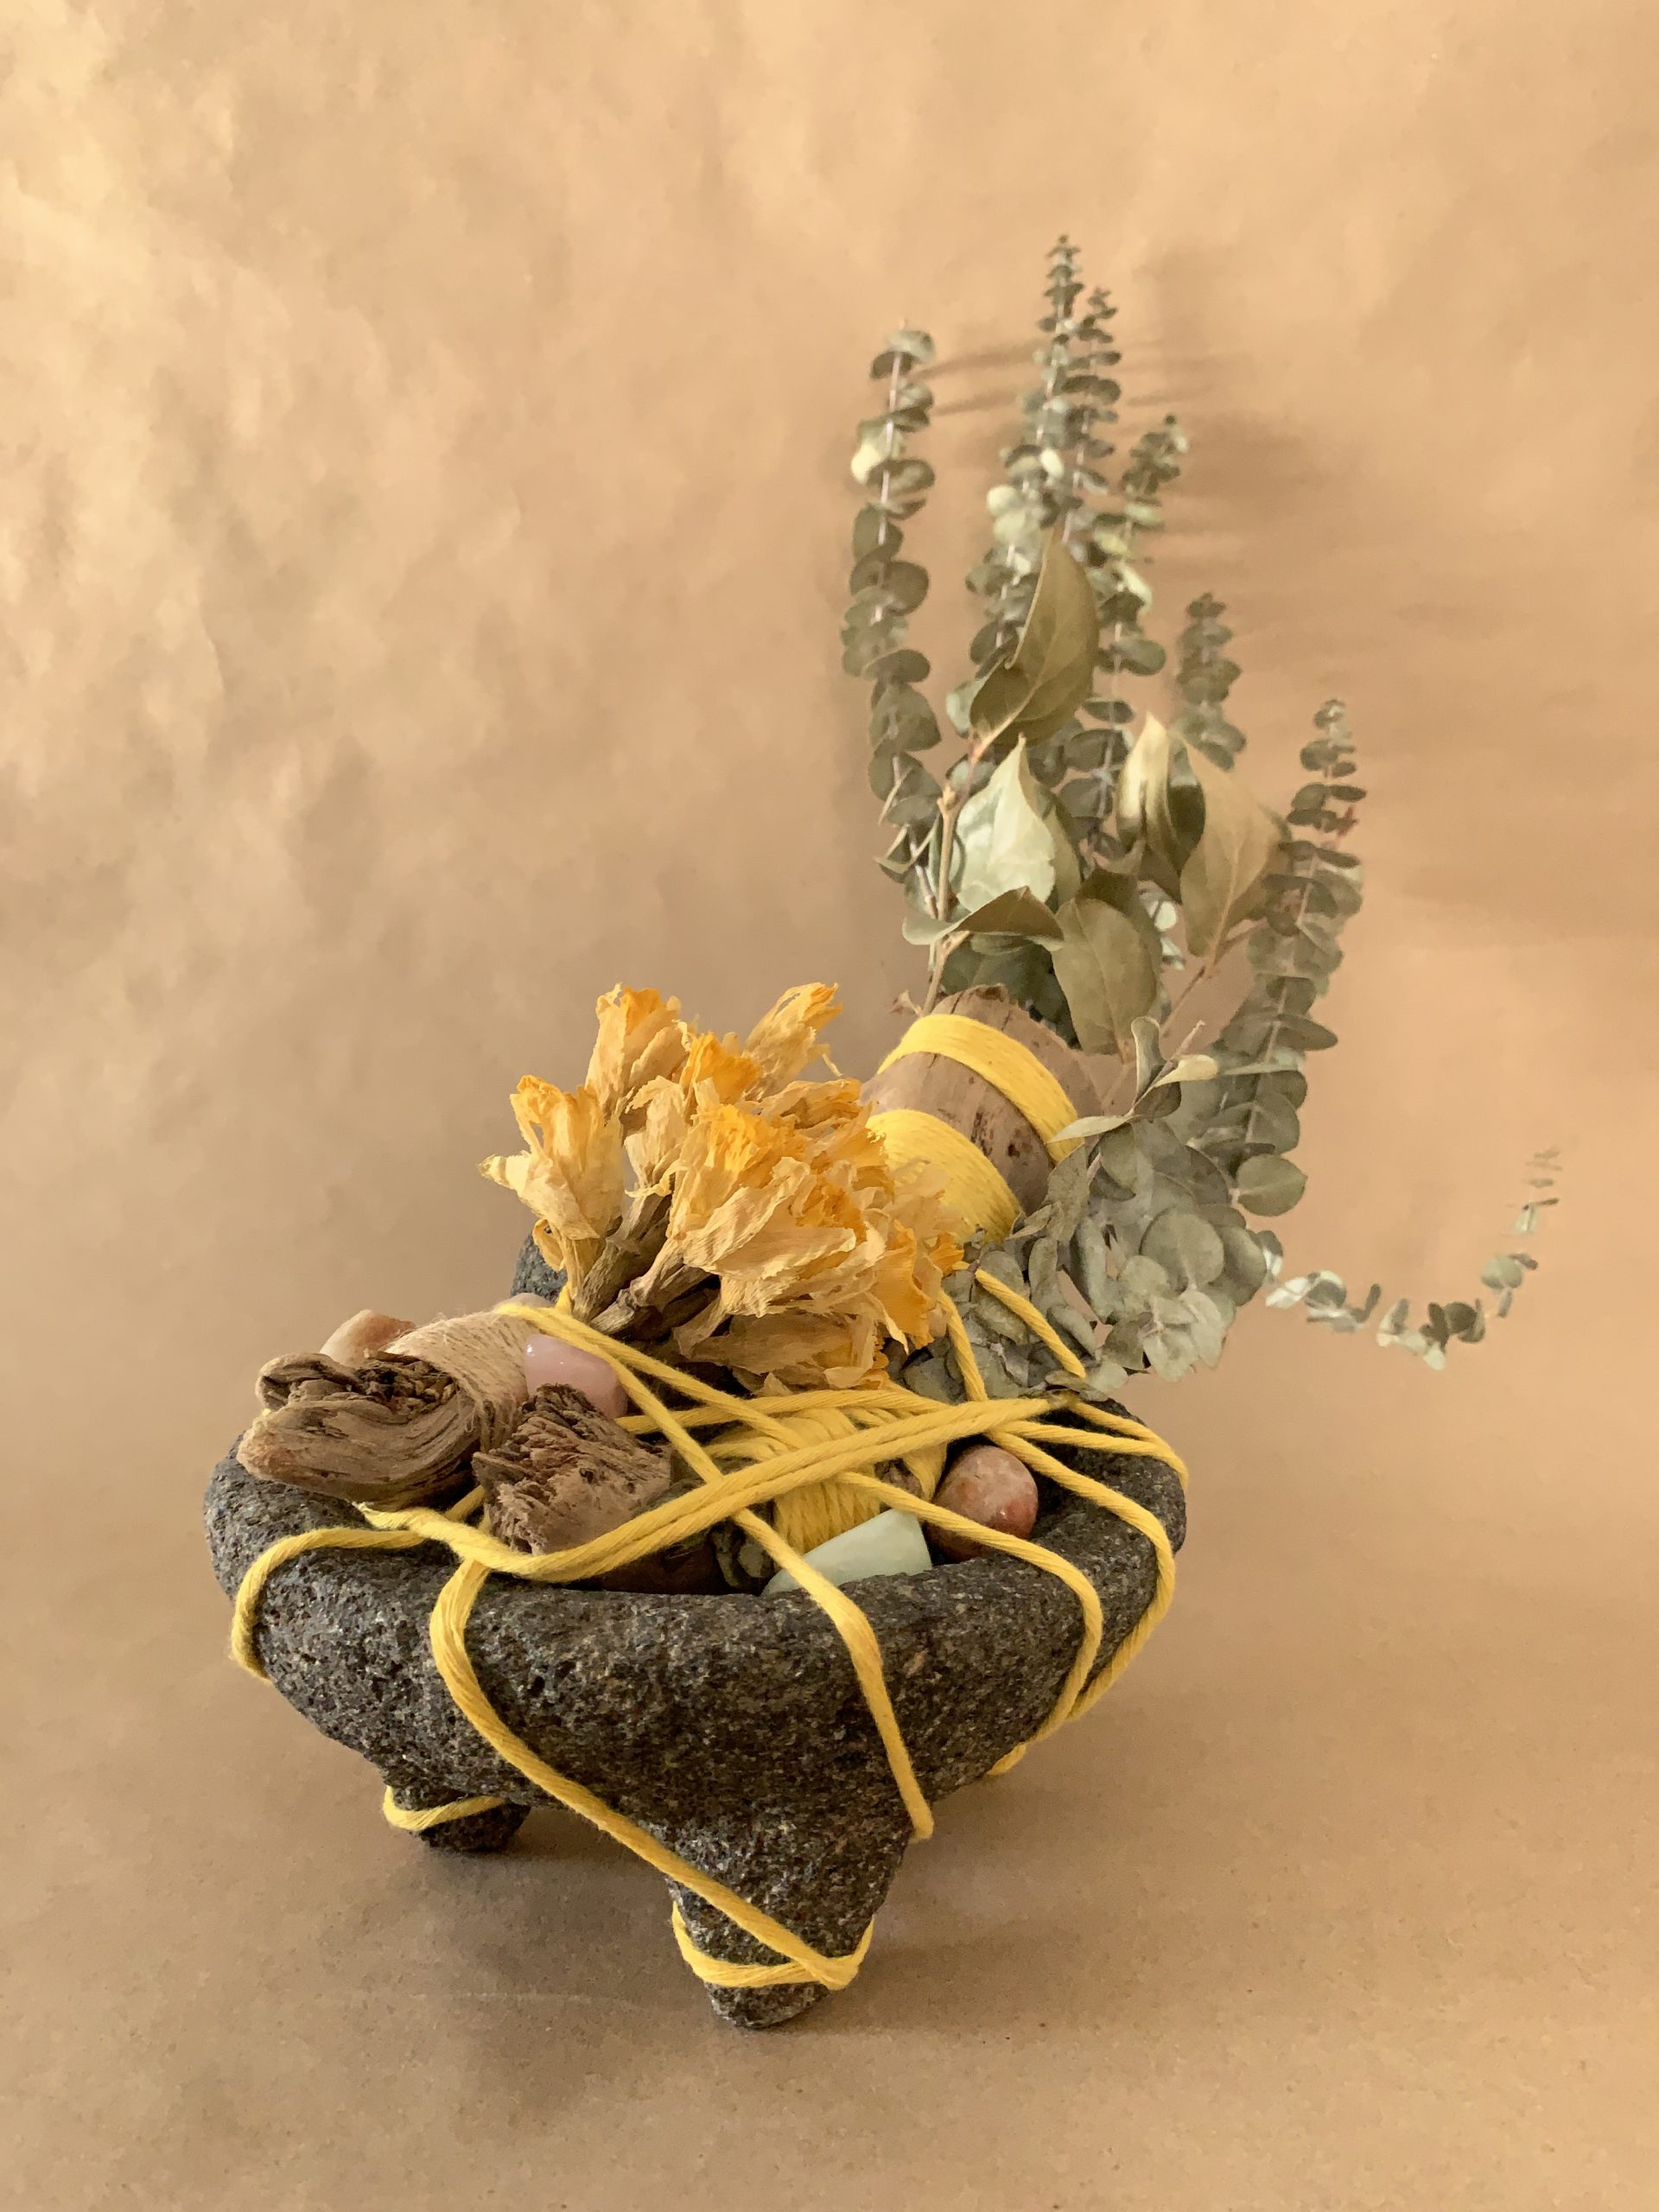 botanicals and driftwood tied with string inside of a mortar and pestle